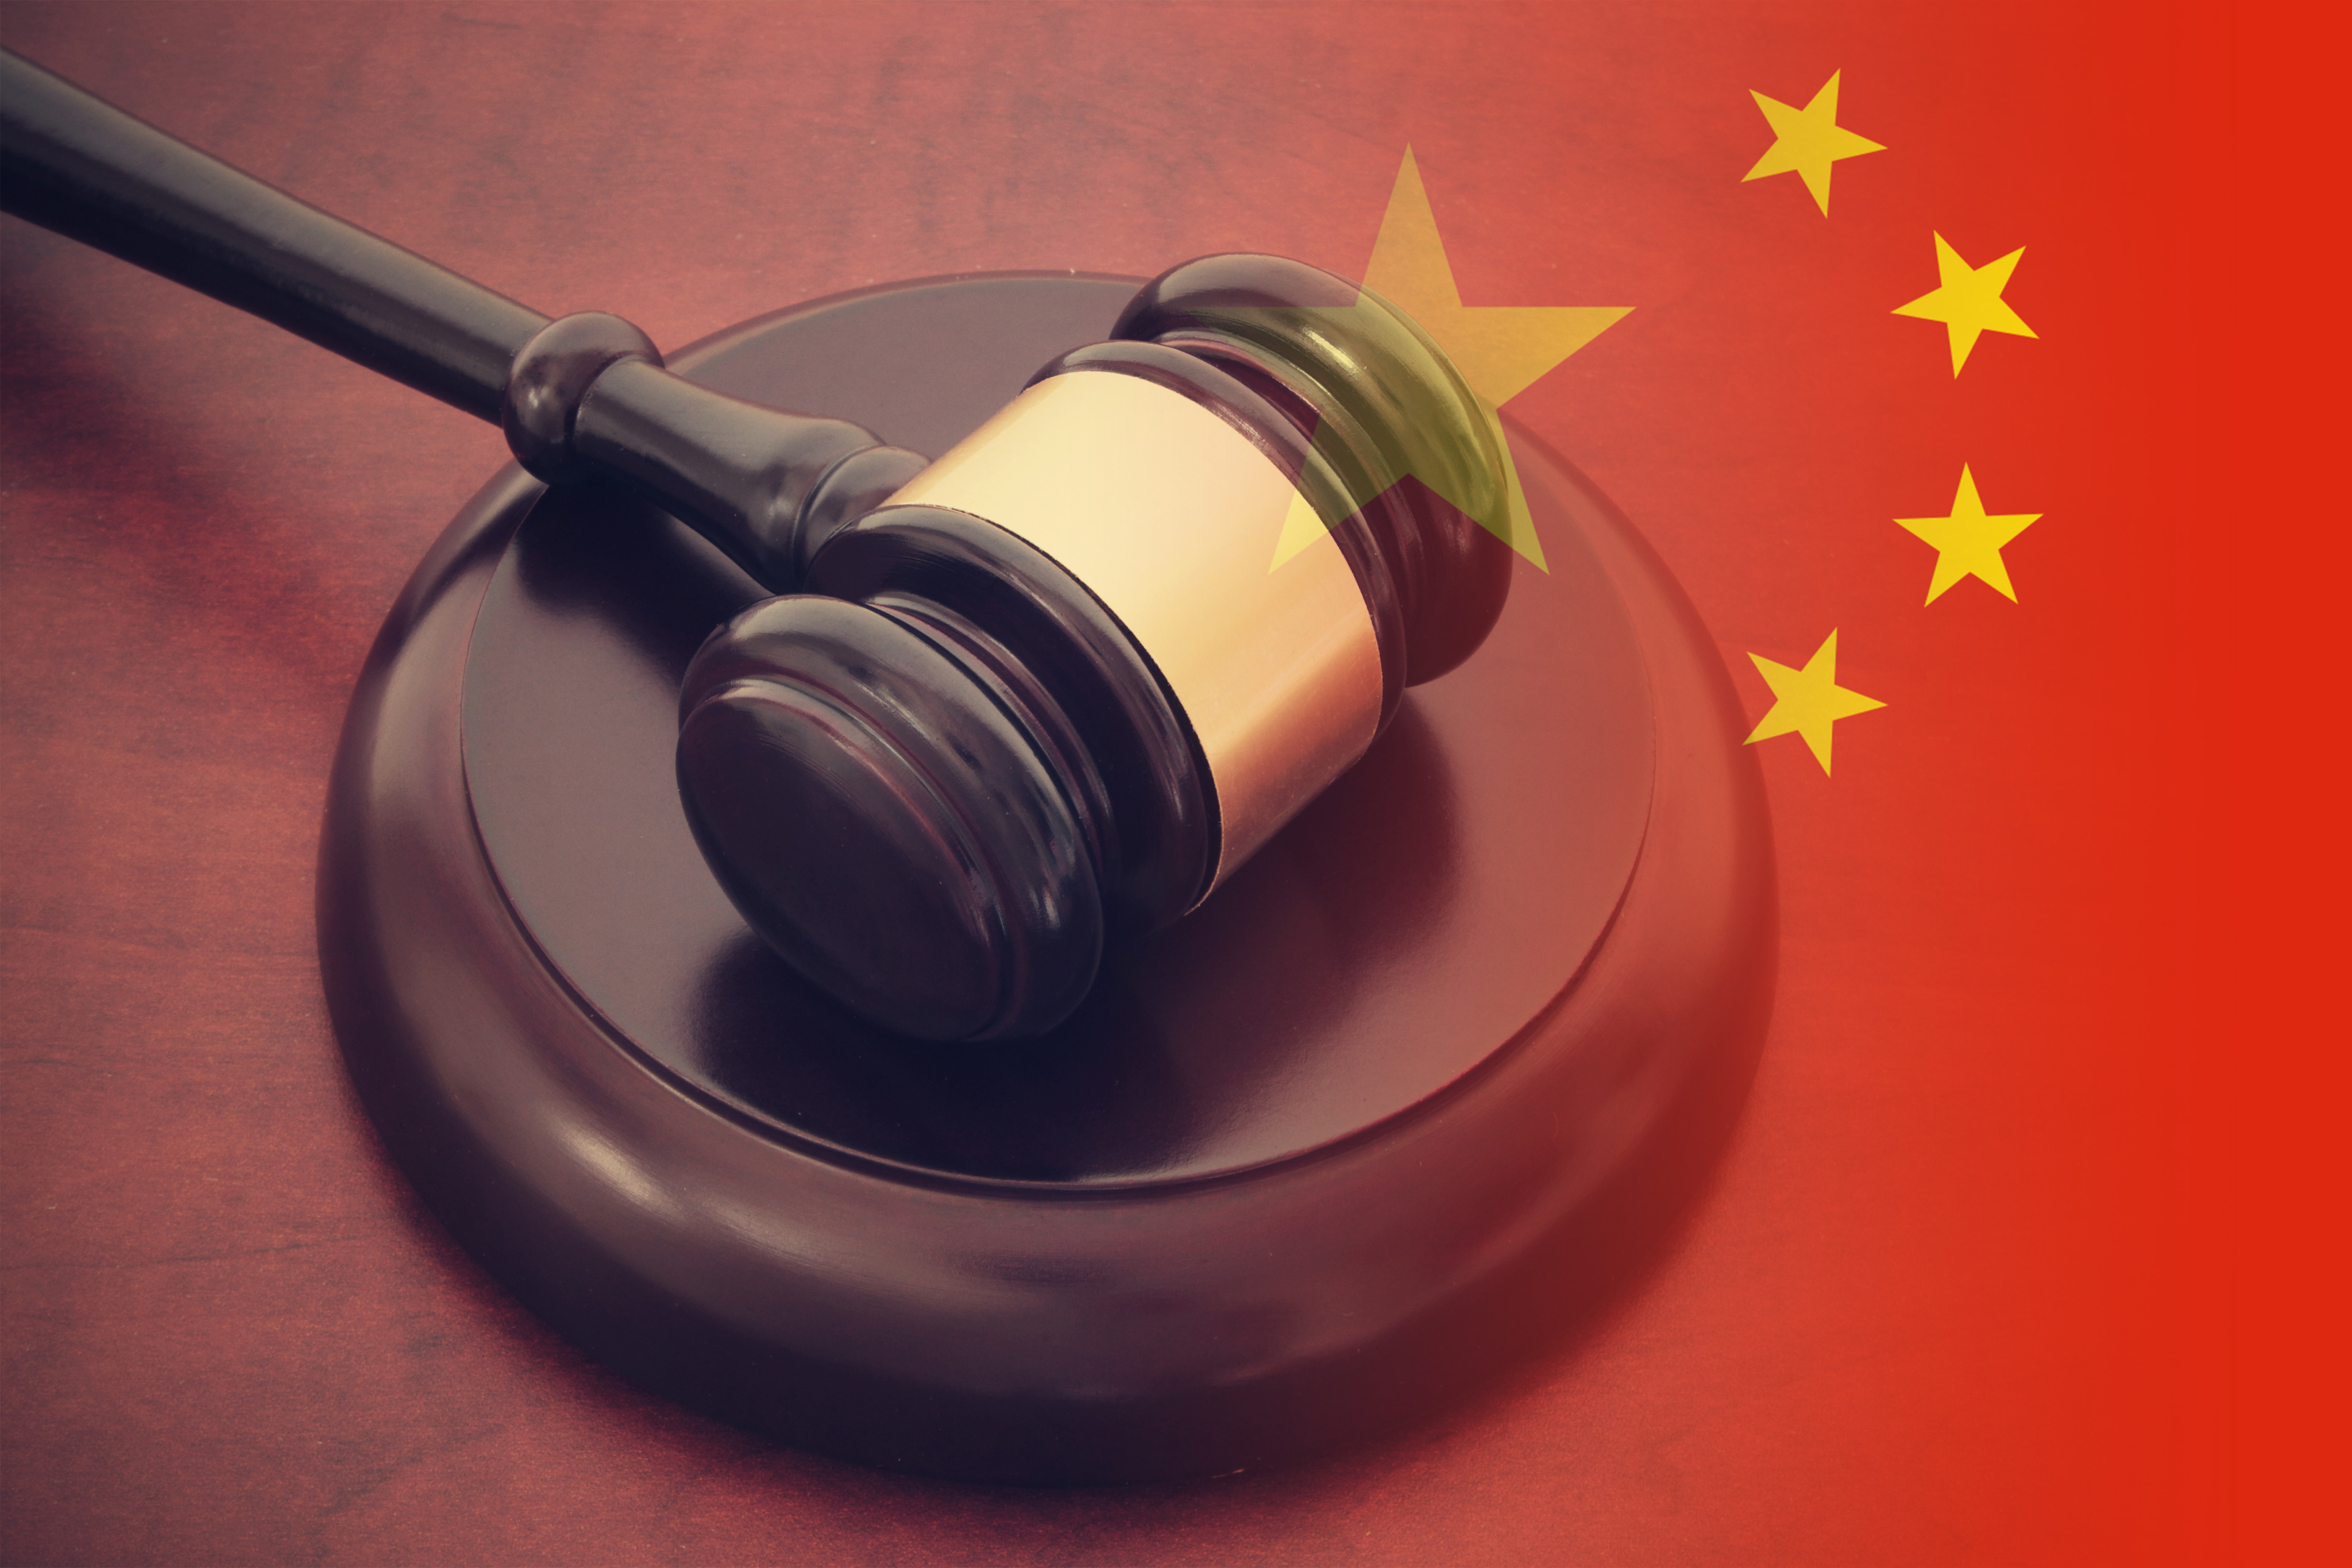 The State Department’s updated travel advisory warns that relatives of those under investigation by Chinese authorities are at risk of exit bans. Photo: Shutterstock